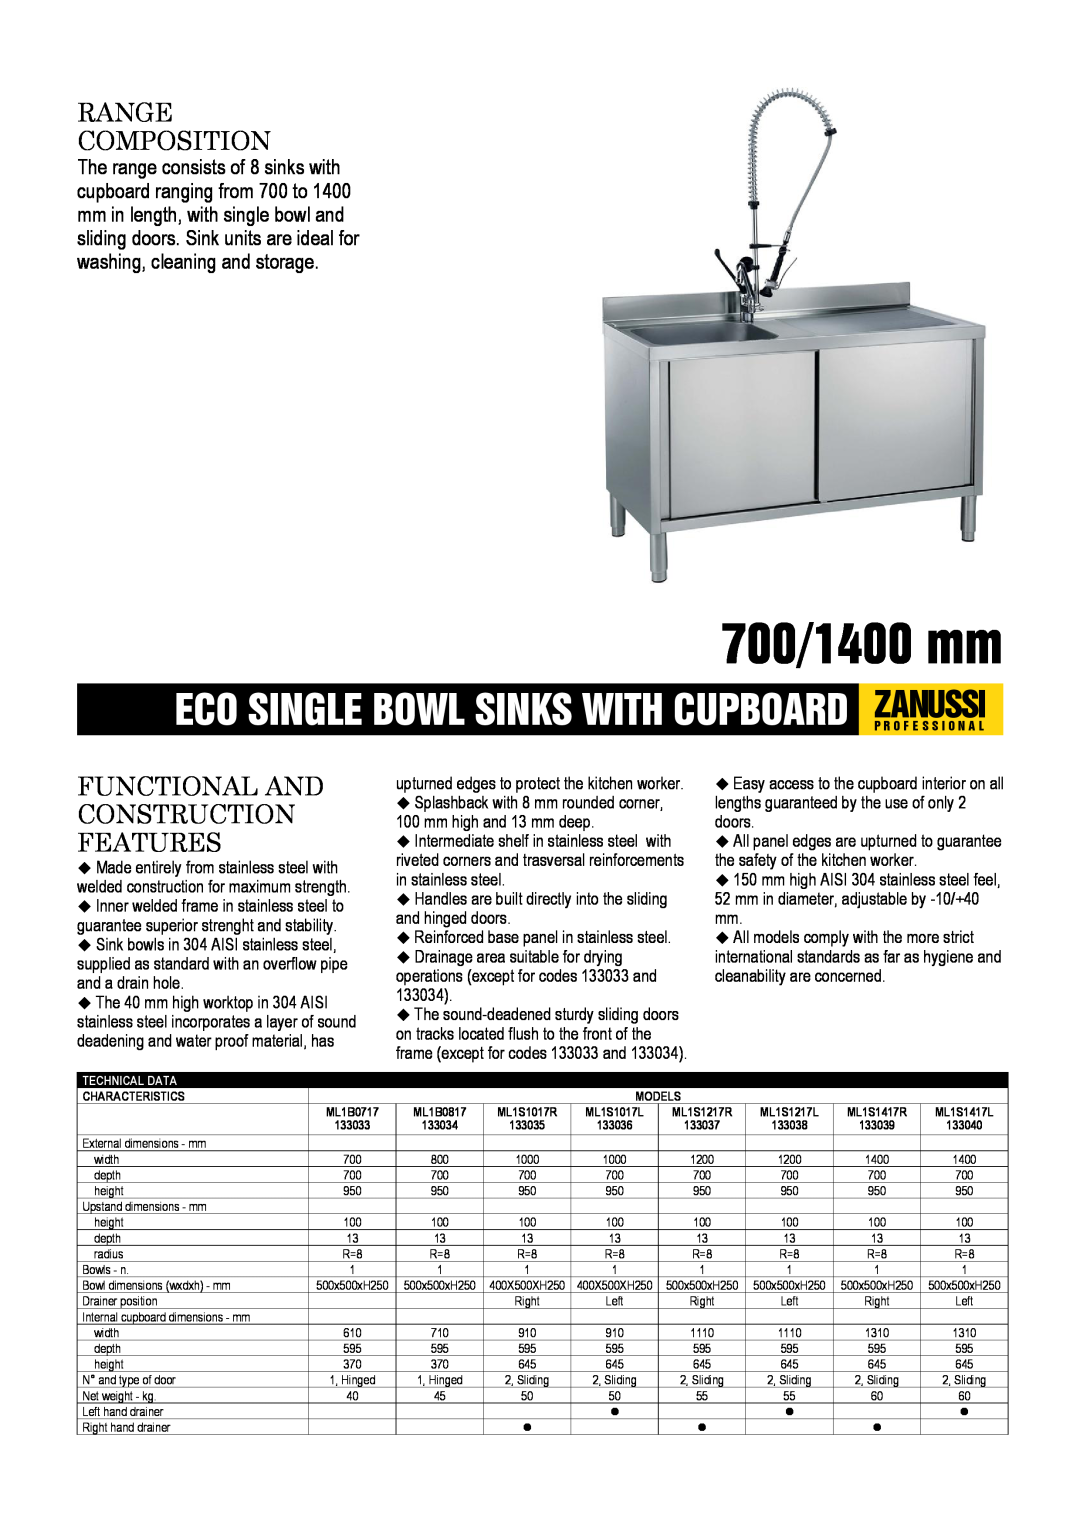 Zanussi ML1S1217R, ML1S1417R, ML1S1017L dimensions 700/1400 mm, Range Composition, Functional And Construction Features 